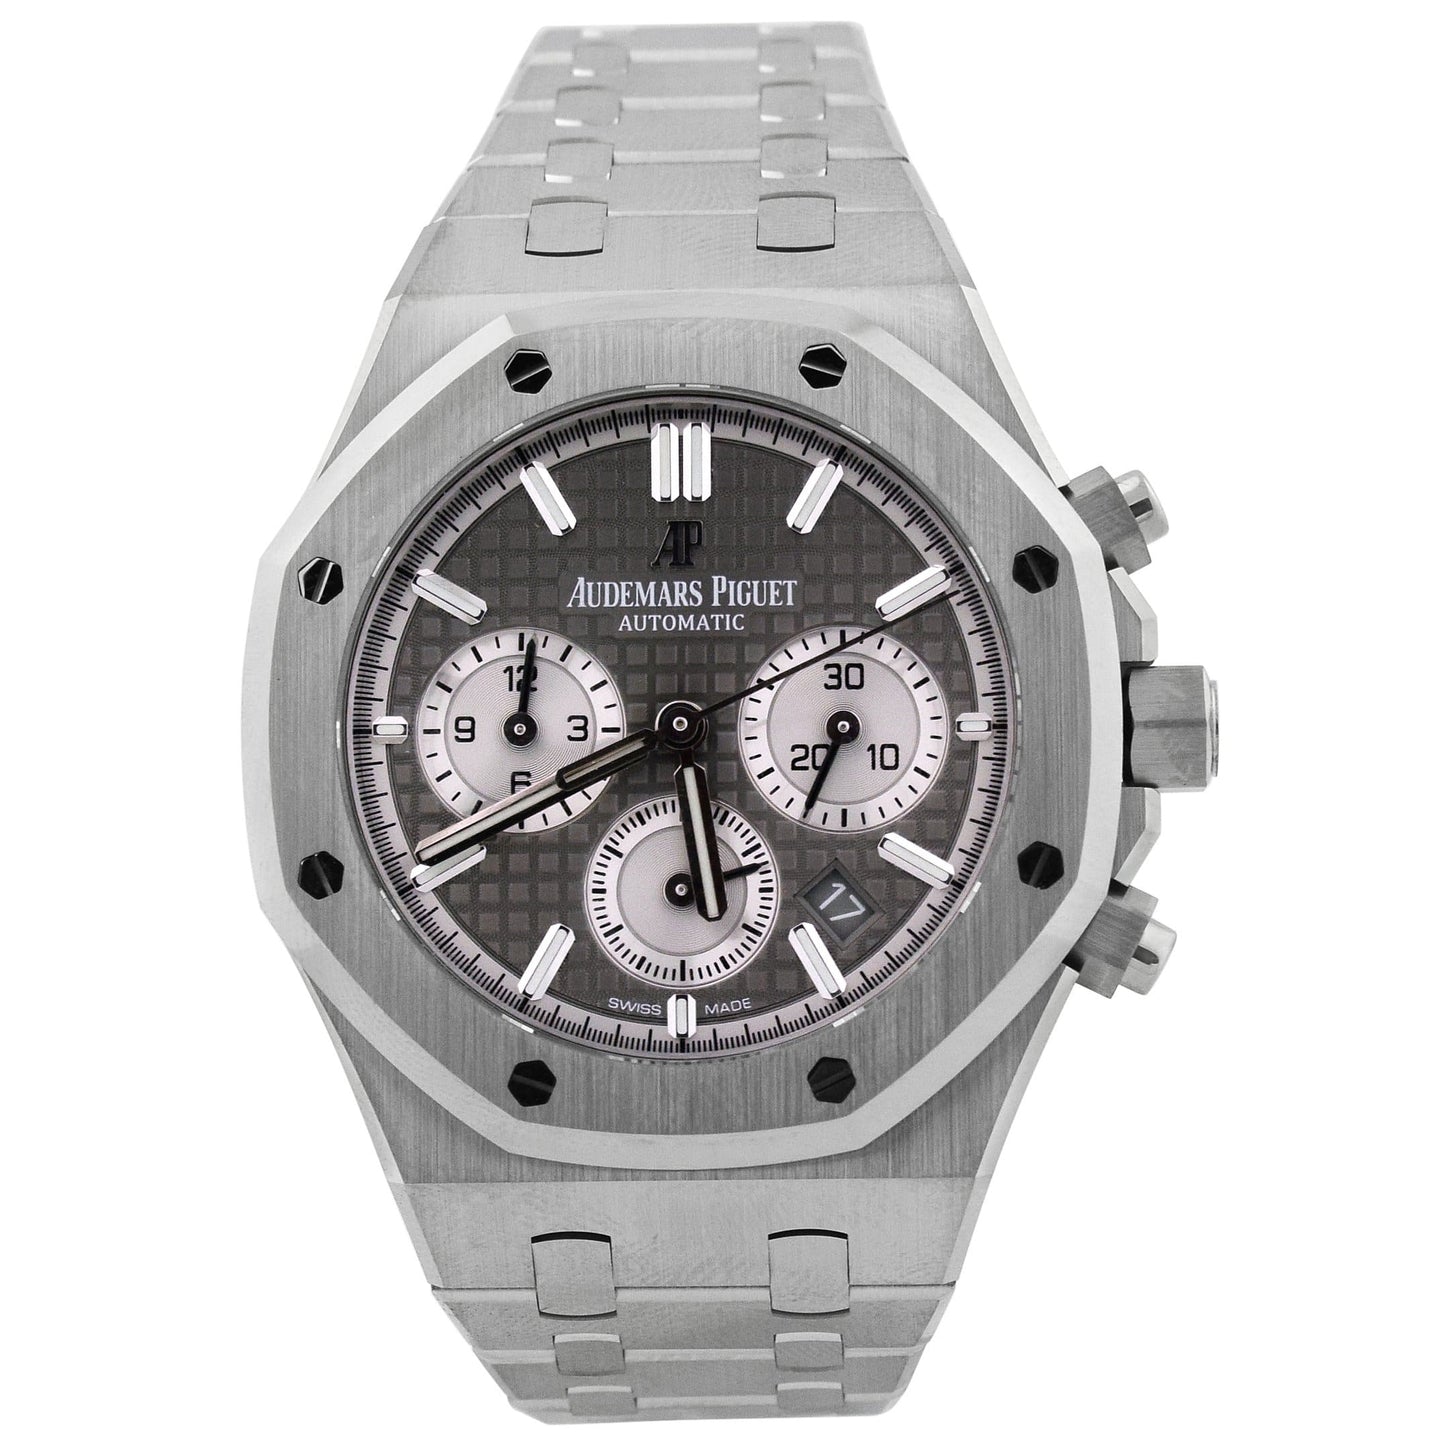 Audemars Piguet Royal Oak Stainless Steel 38mm Silver Chronograph Dial Watch Reference#:  26315ST.OO.1256ST.02 - Happy Jewelers Fine Jewelry Lifetime Warranty